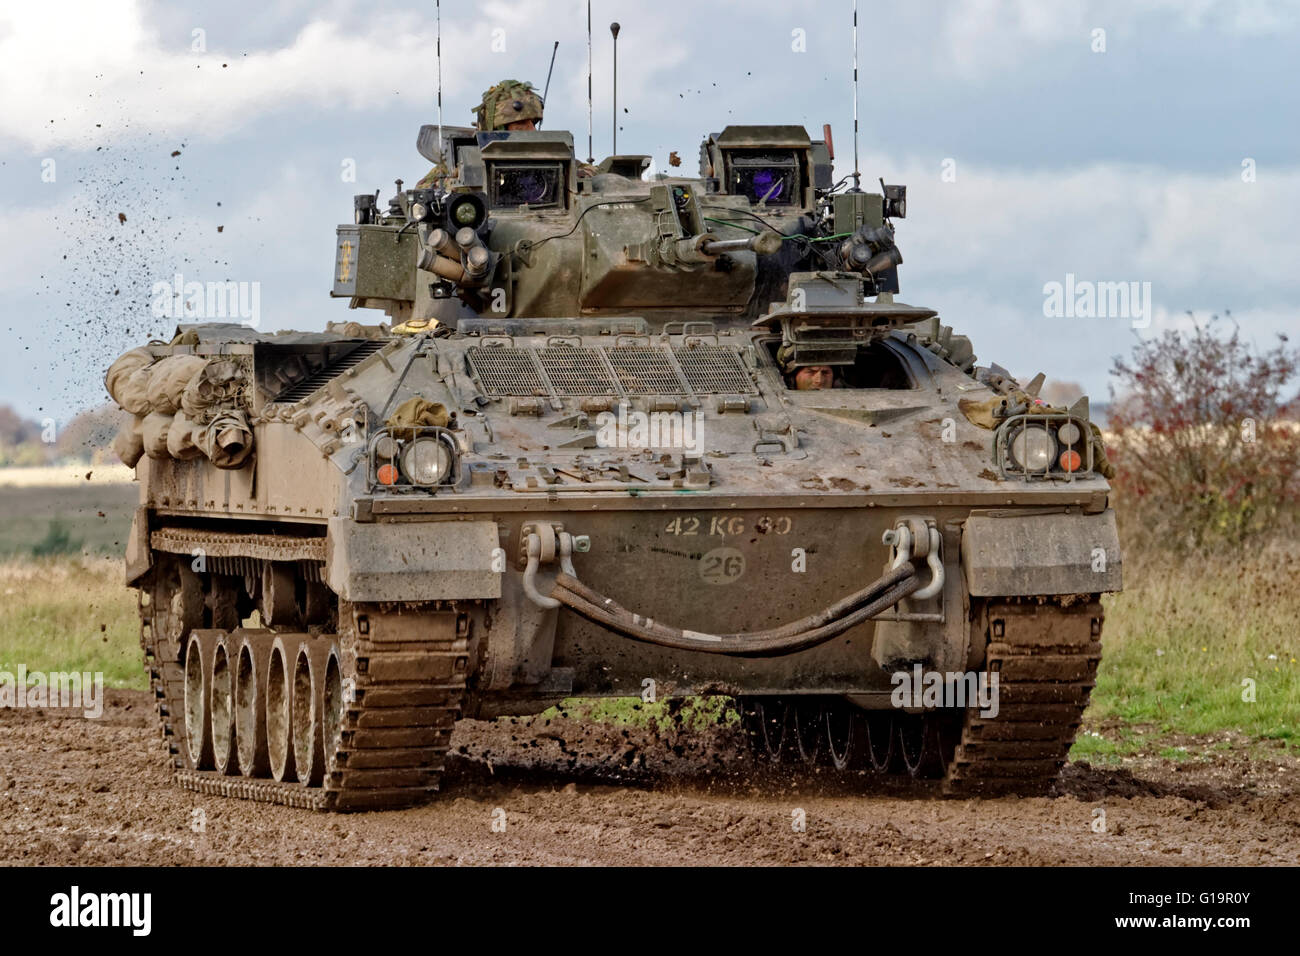 A British Army Warrior Infantry Fighting Vehicle, MCV-80, on the Salisbury Plain military Training Area in Wiltshire, UK. Stock Photo